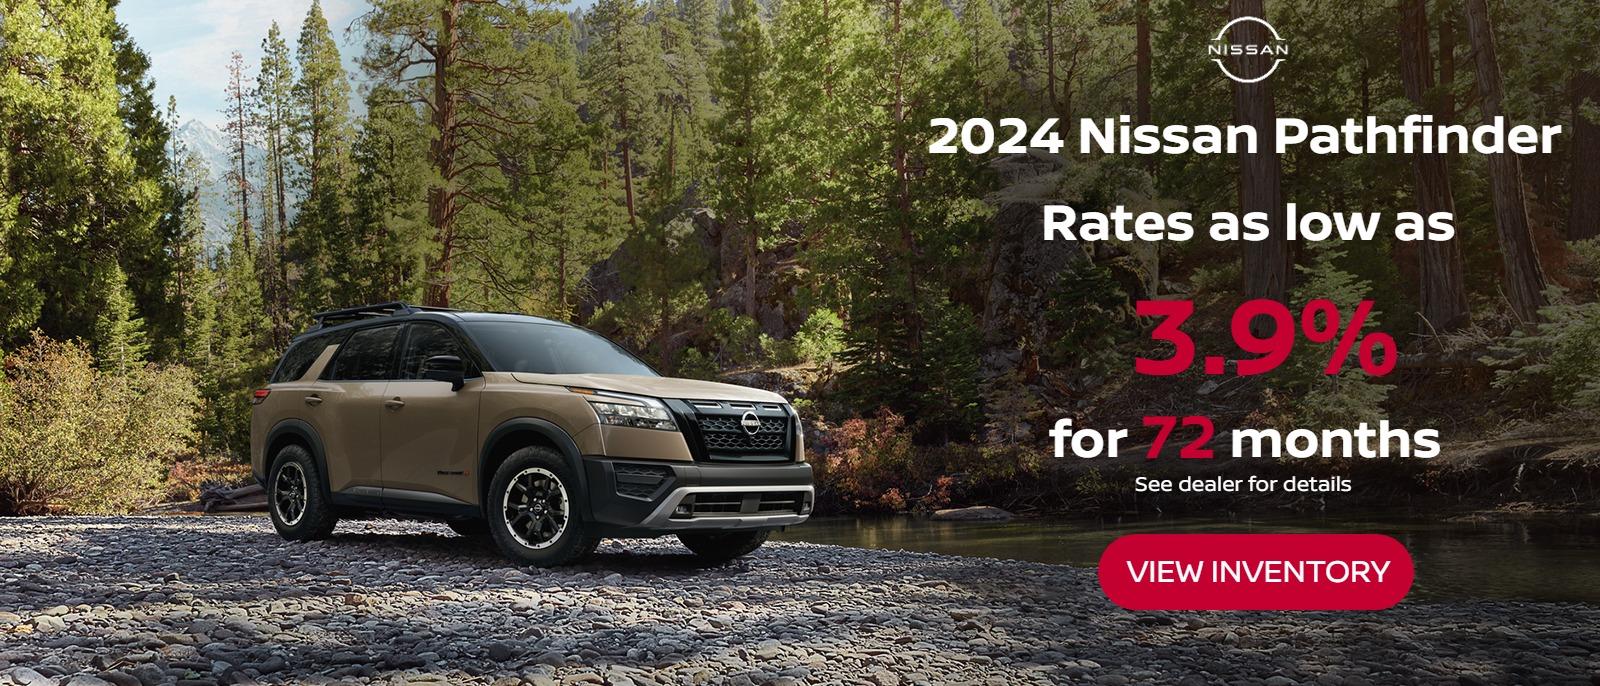 2024 Nissan Pathfinder
Rates as low as 3.9% for 72 months
*see dealer for details